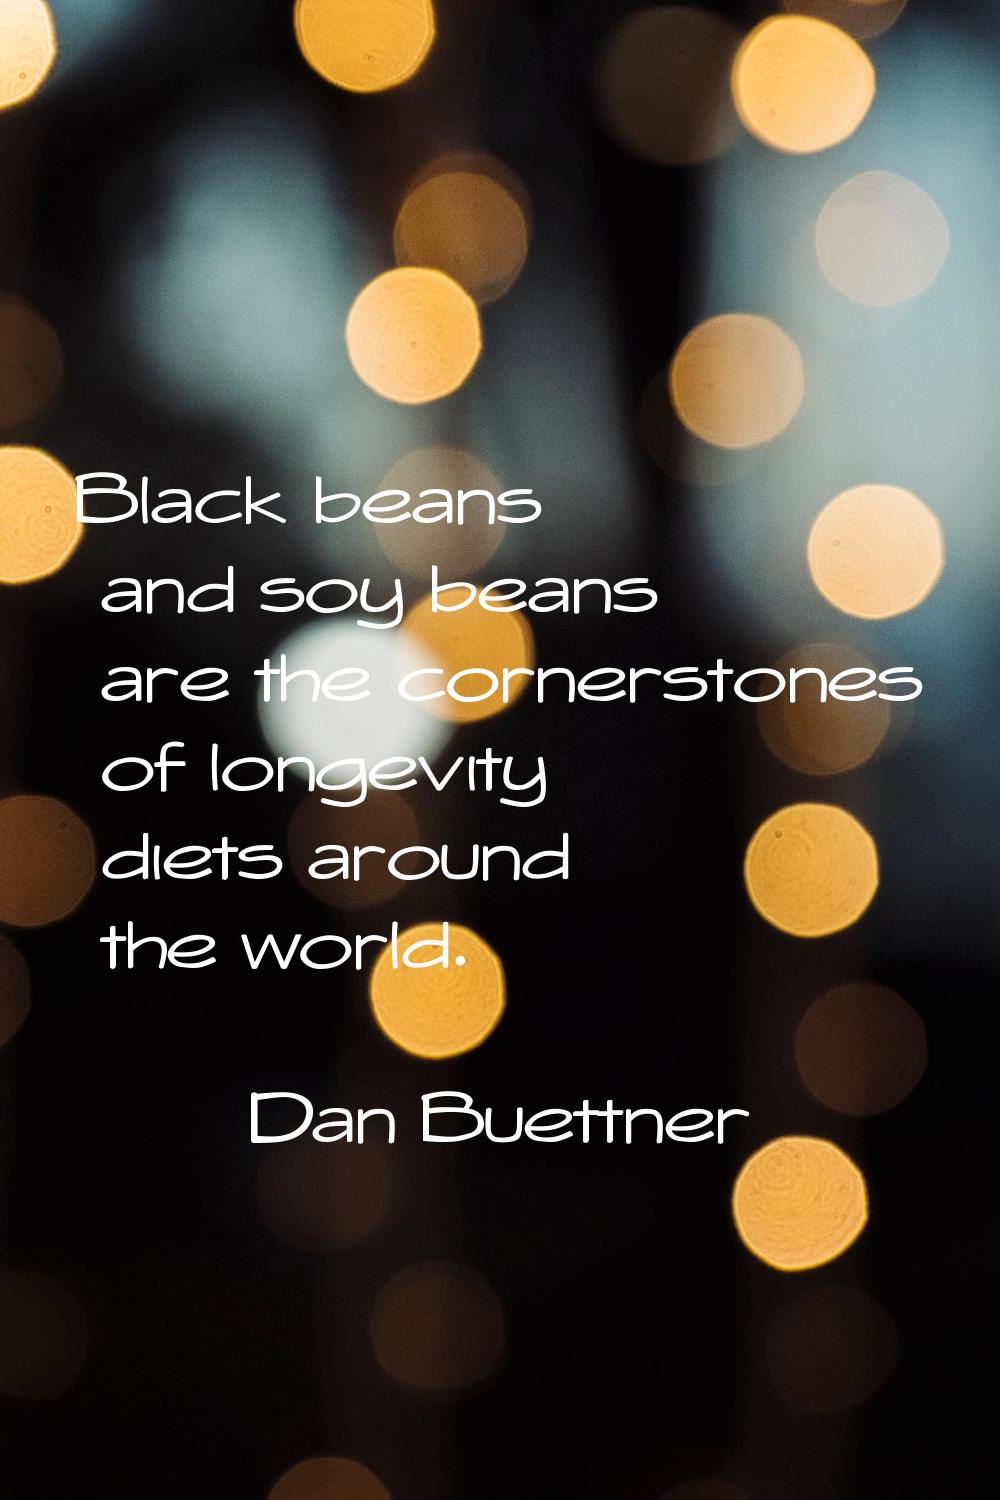 Black beans and soy beans are the cornerstones of longevity diets around the world.